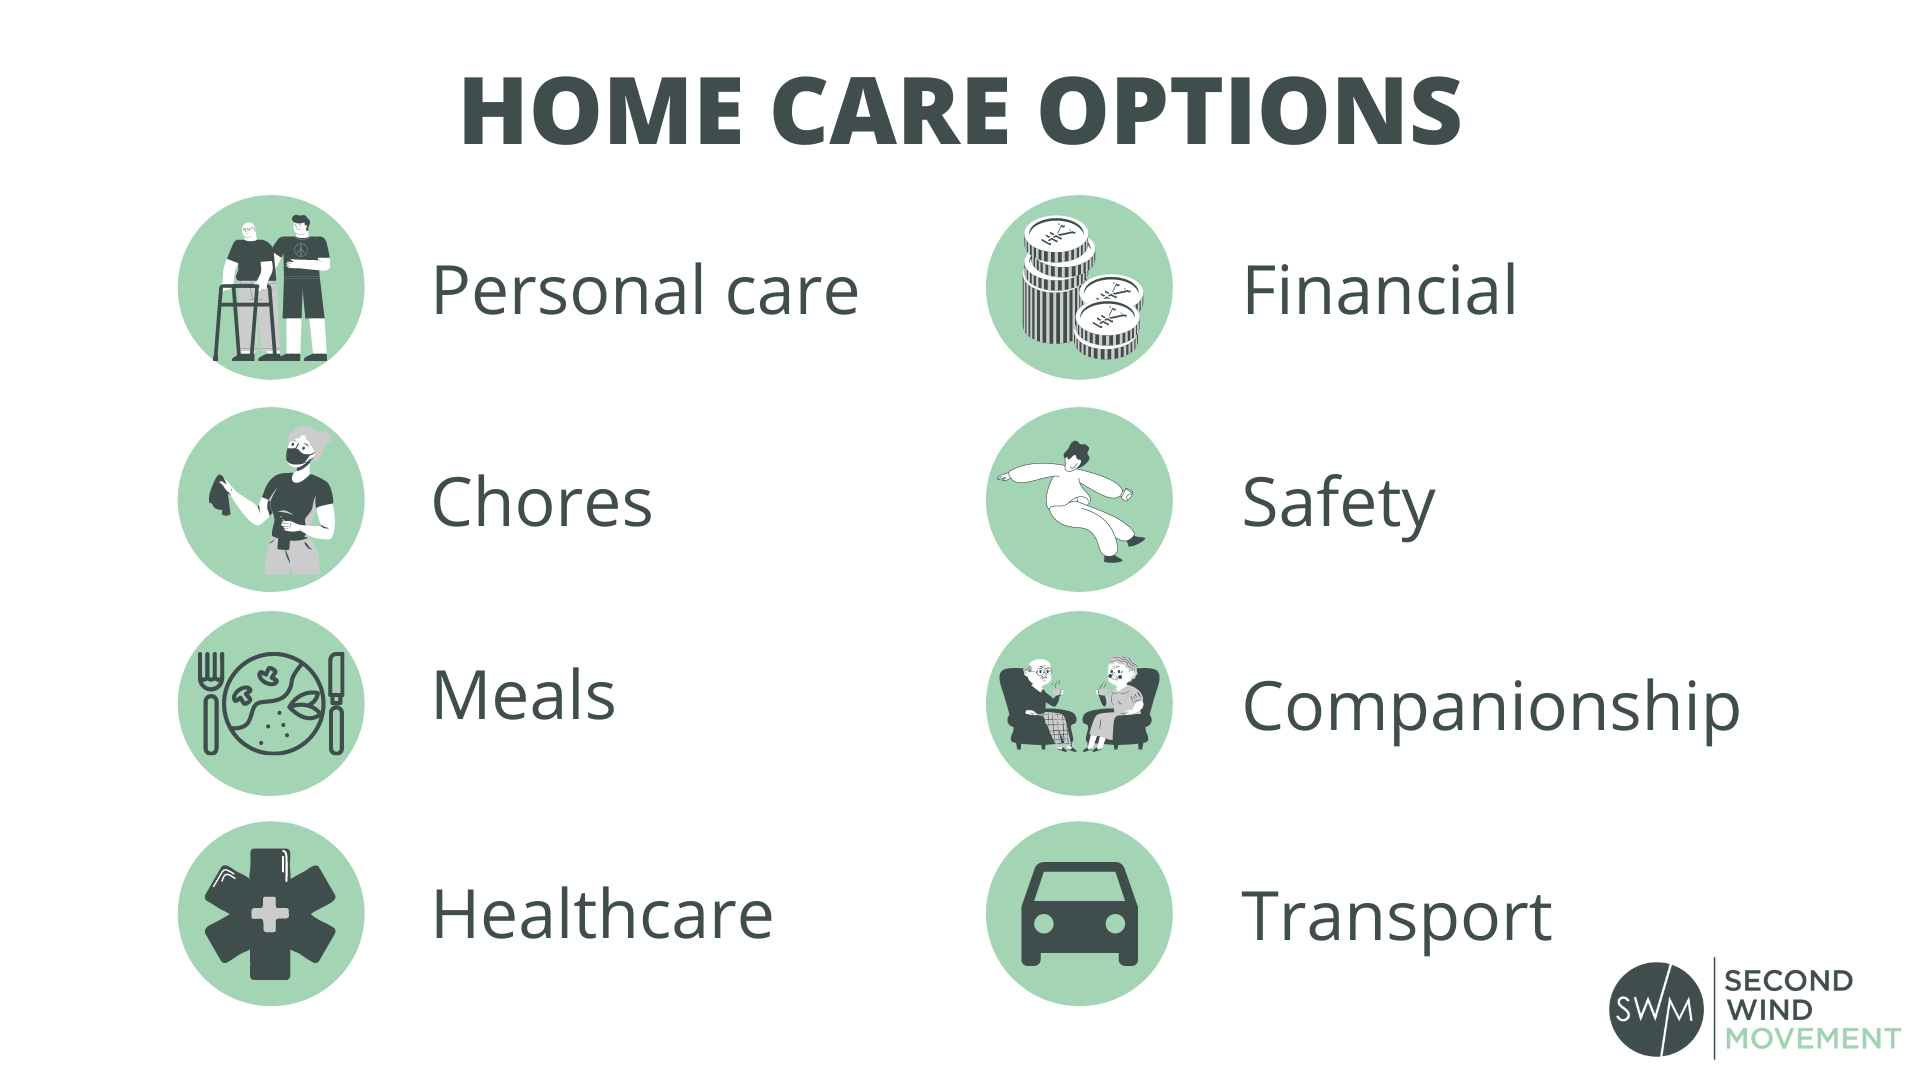 home care options can cover personal care, chores, meals, healthcare, financial, safety, companionship, healthcare, and transportation factors for seniors looking to age in place